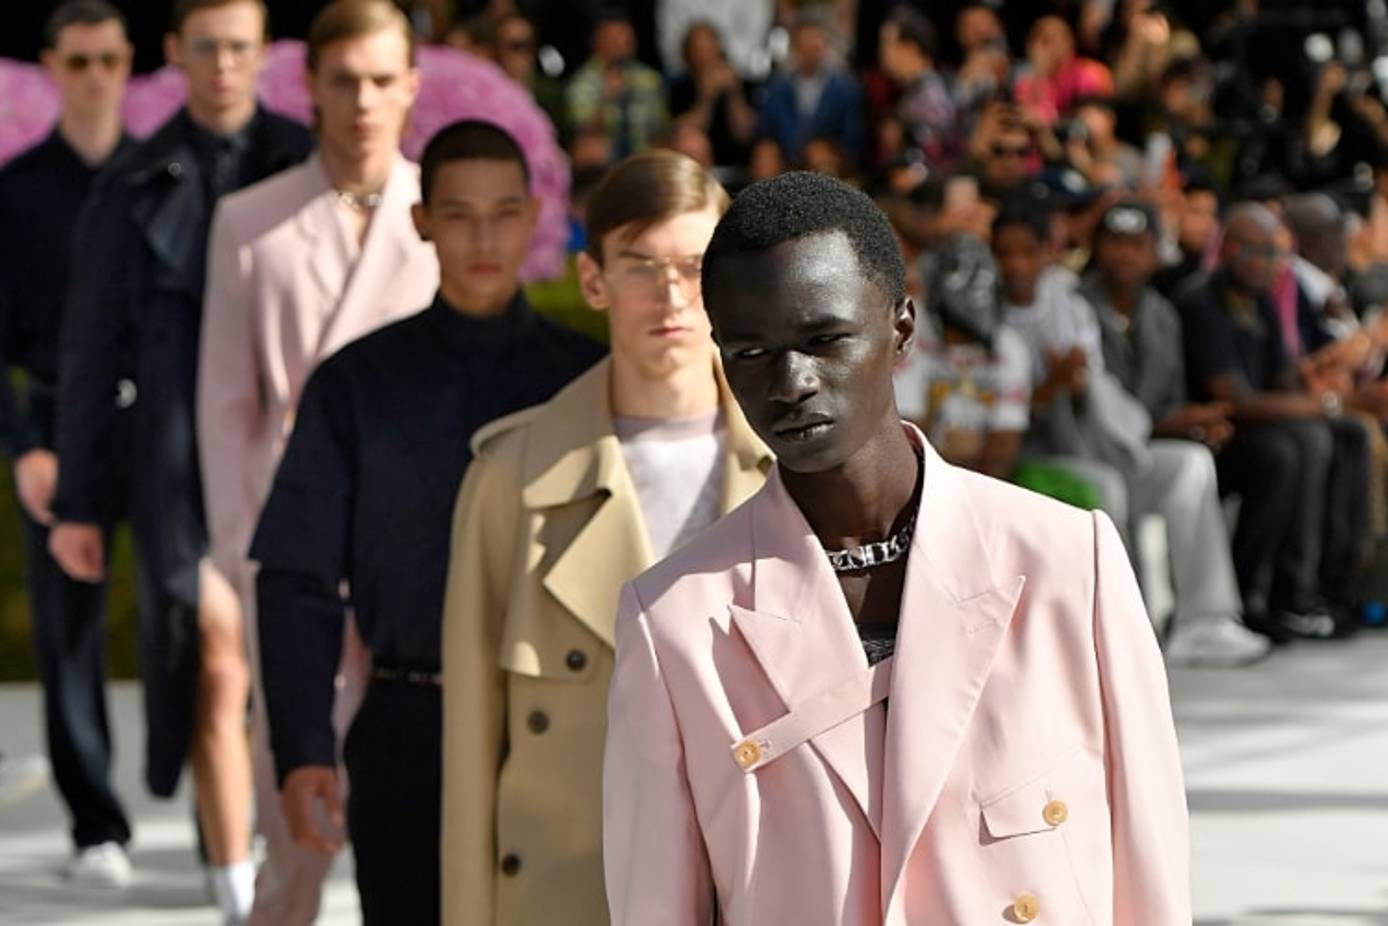 Everything you need to know about Kim Jones' debut Dior Homme show